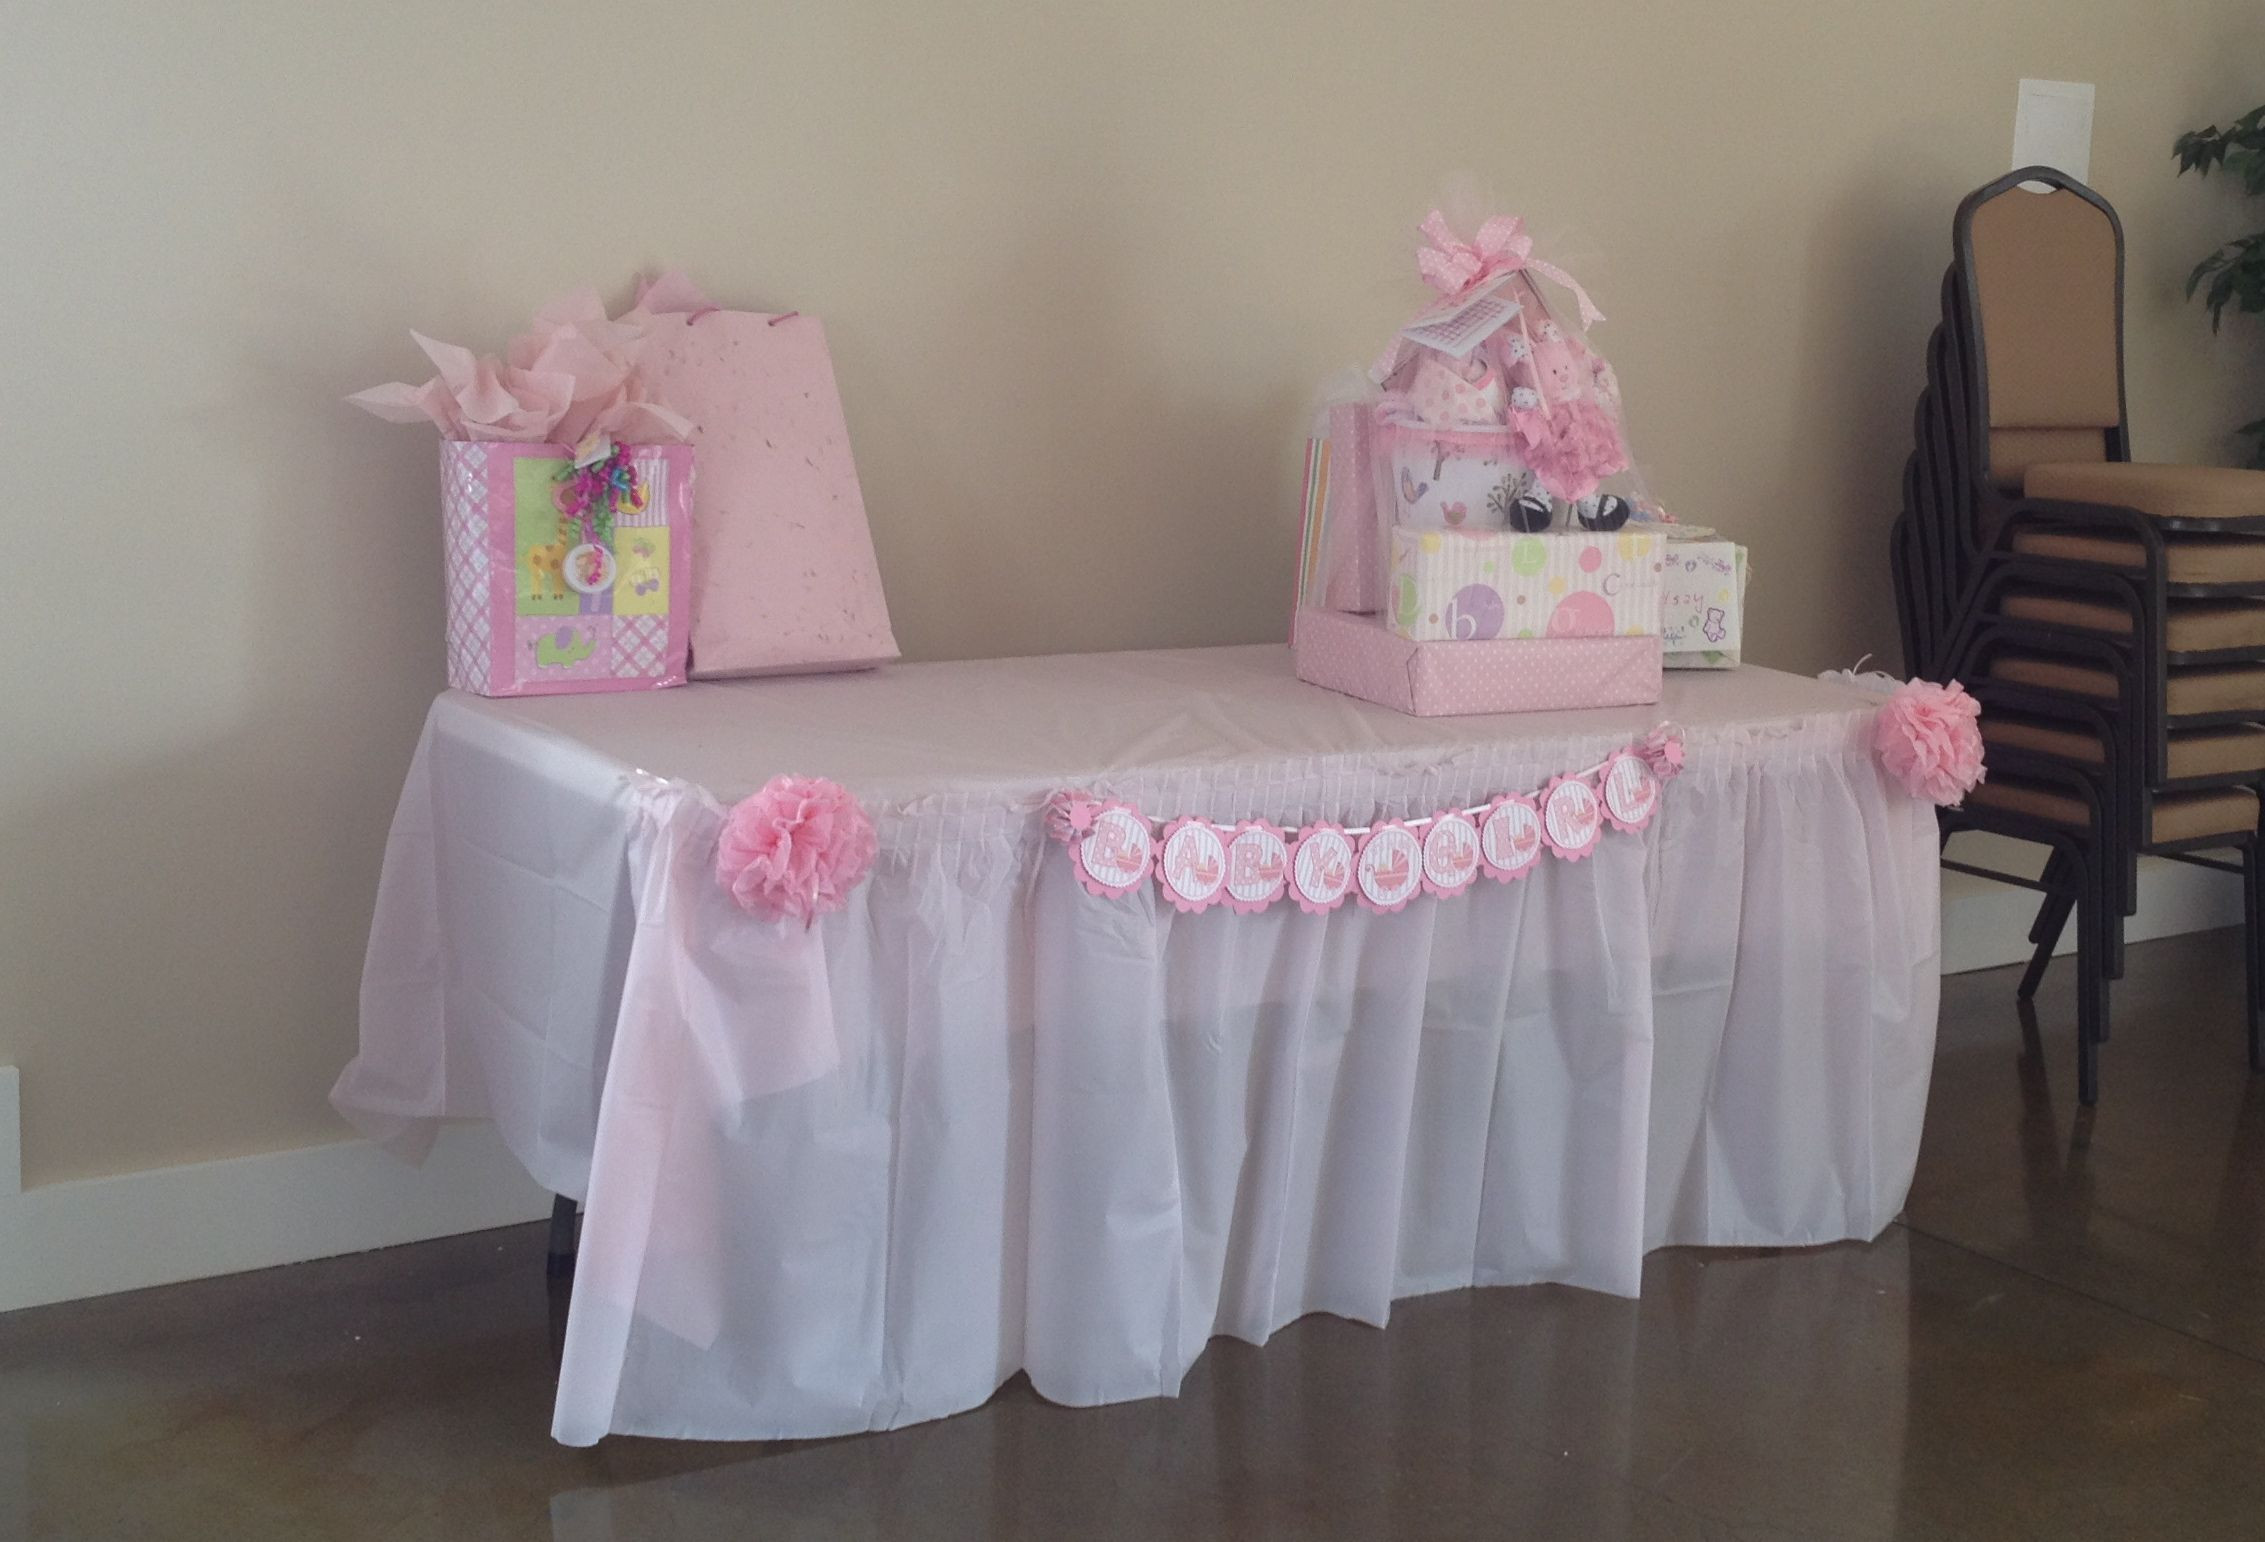 Gift Table Ideas For Baby Shower
 BABY SHOWER t table